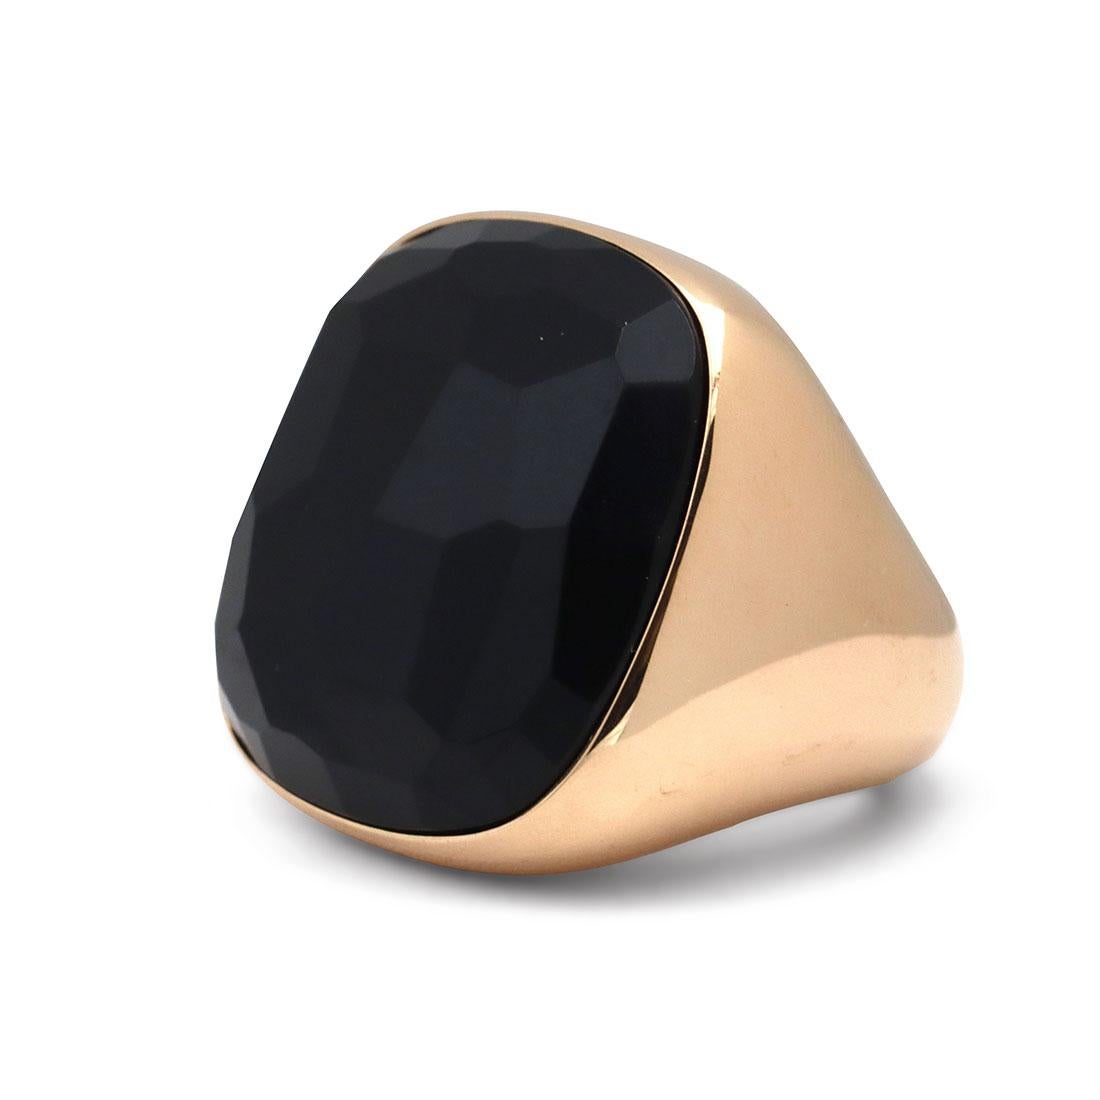 Authentic Pomellato 'Victoria' ring crafted in high polished 18 karat gold and set with a large, faceted jet measuring 25.6mm x 25.6mm.  Size 6 1/4.  Signed Pomellato, 750, with Italian hallmark.  Ring is presented without the original box and